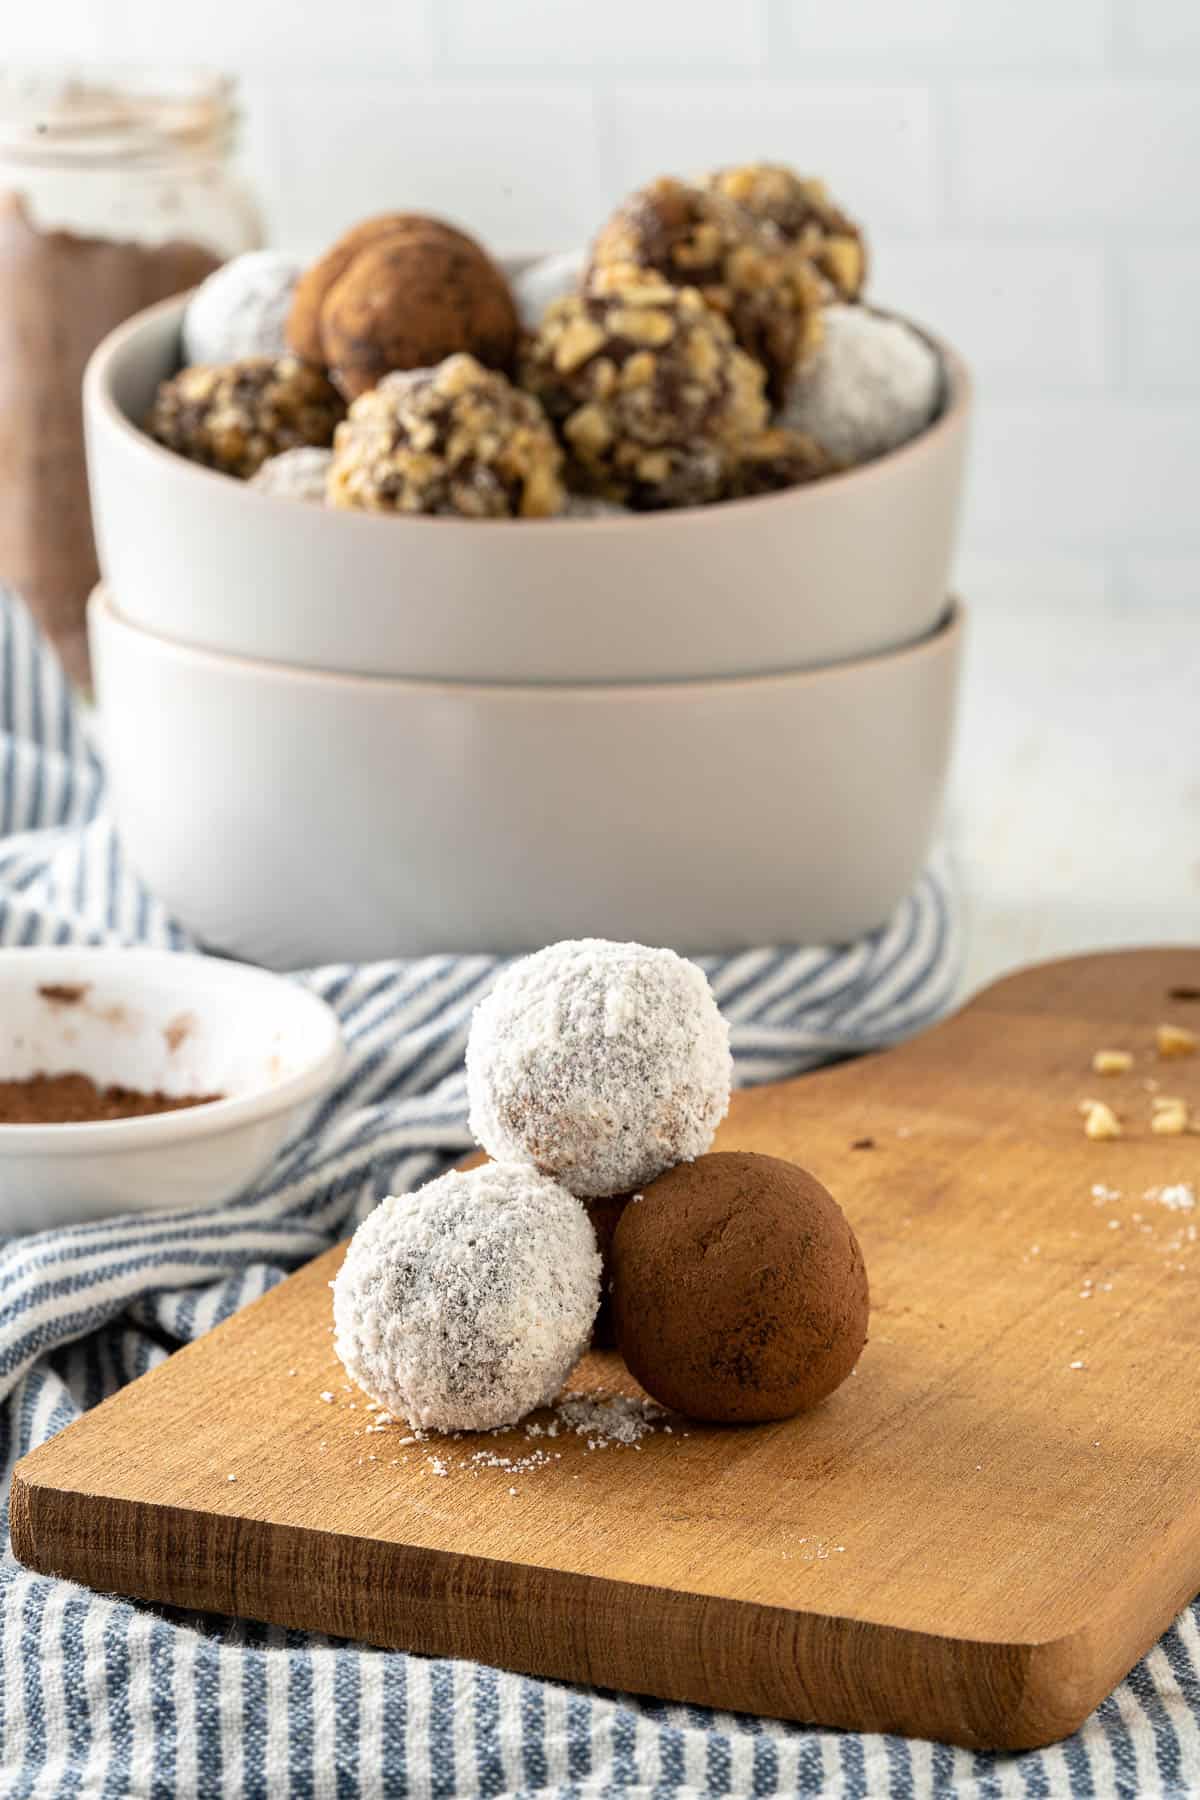 a bowl of assorted chocolate truffles, covered with cocoa powder, coconut, and walnuts